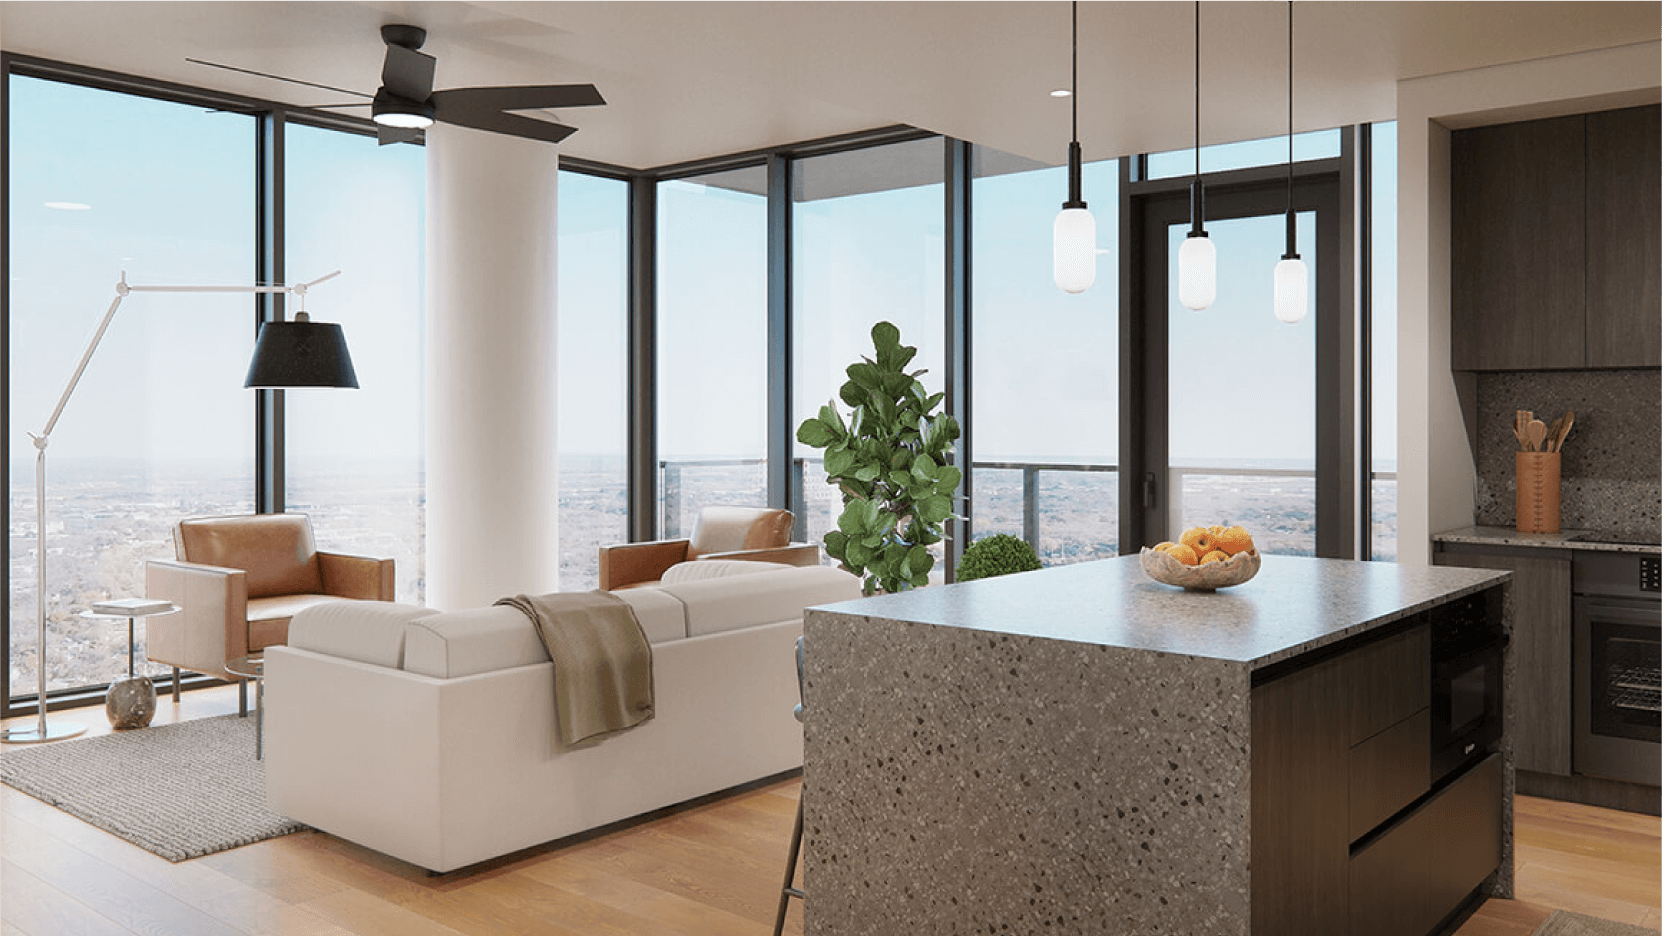 Bright and airy open-plan living area in Vesper ATX condos, featuring a white sofa, wooden accents, and a panoramic view of the cityscape through floor-to-ceiling windows.